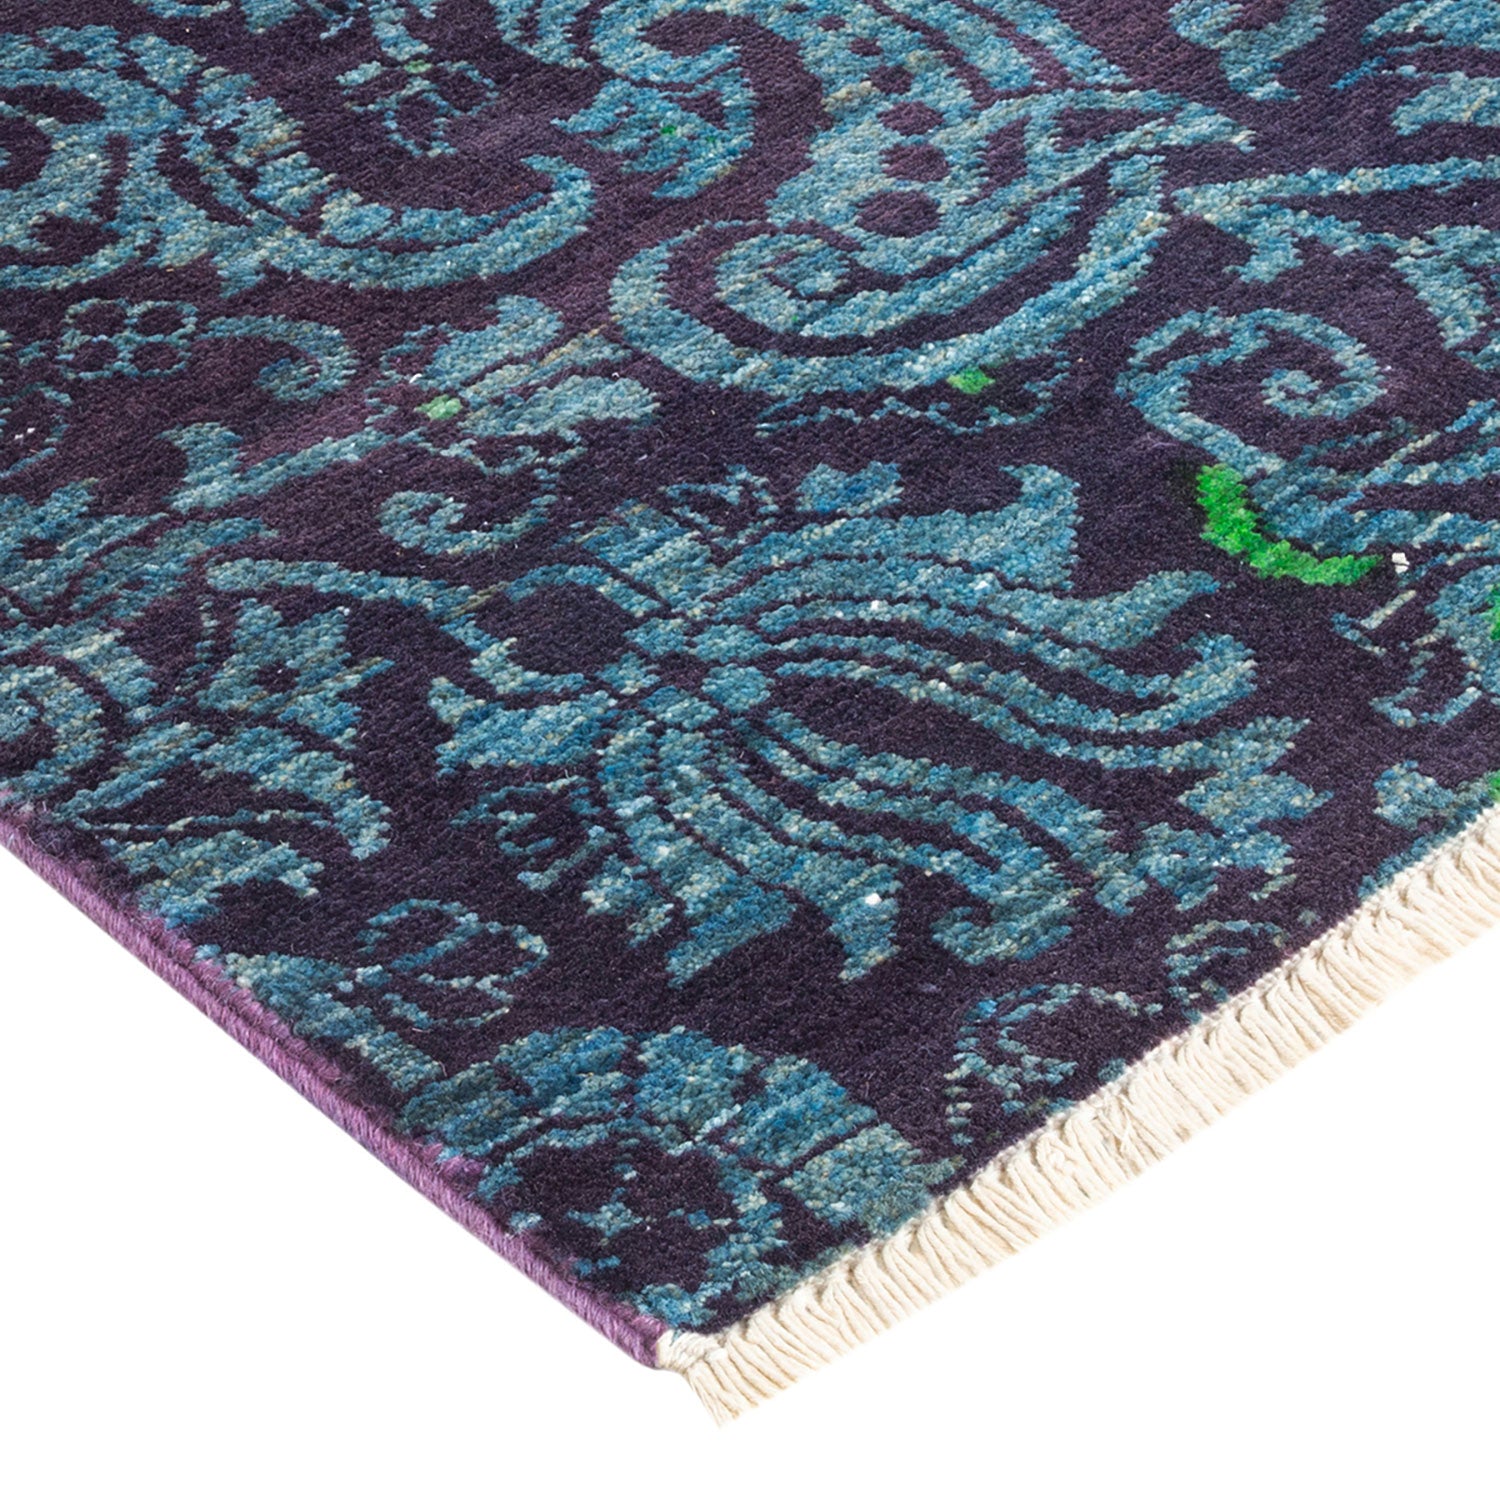 Close-up of a plush, deep purple carpet with intricate detailing.